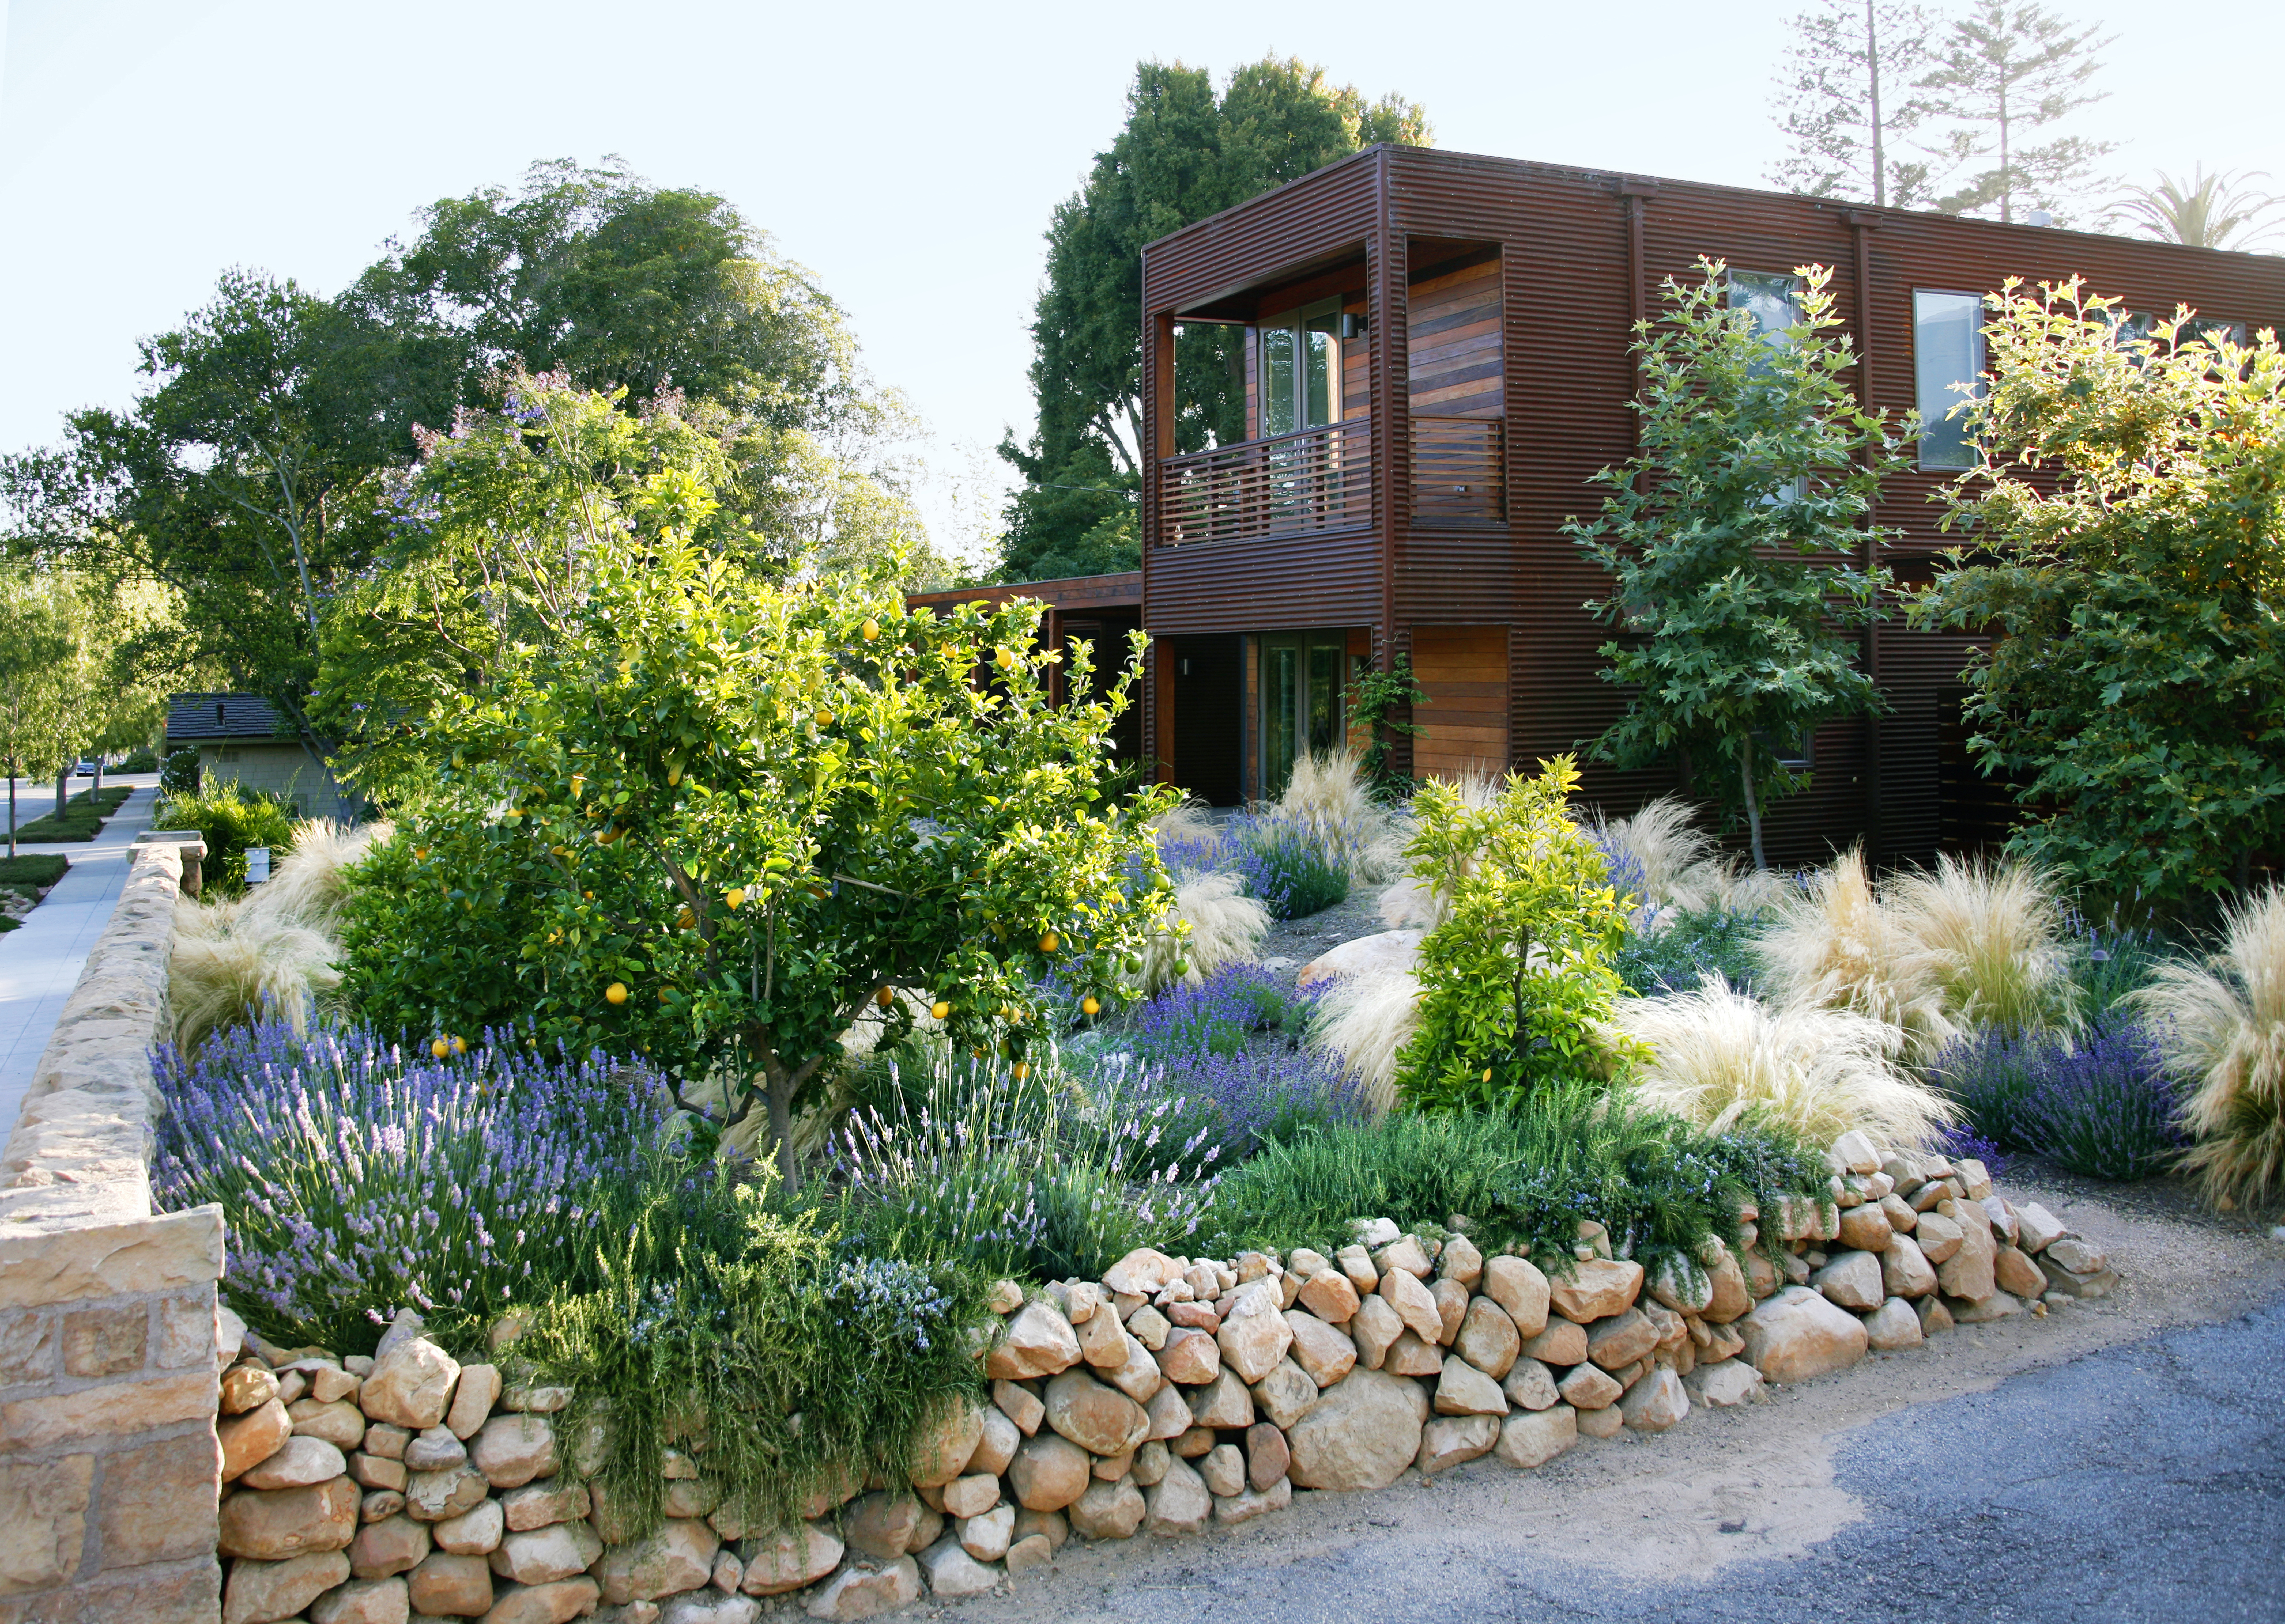 Designing With Drought Resistant Plants Sunset Magazine